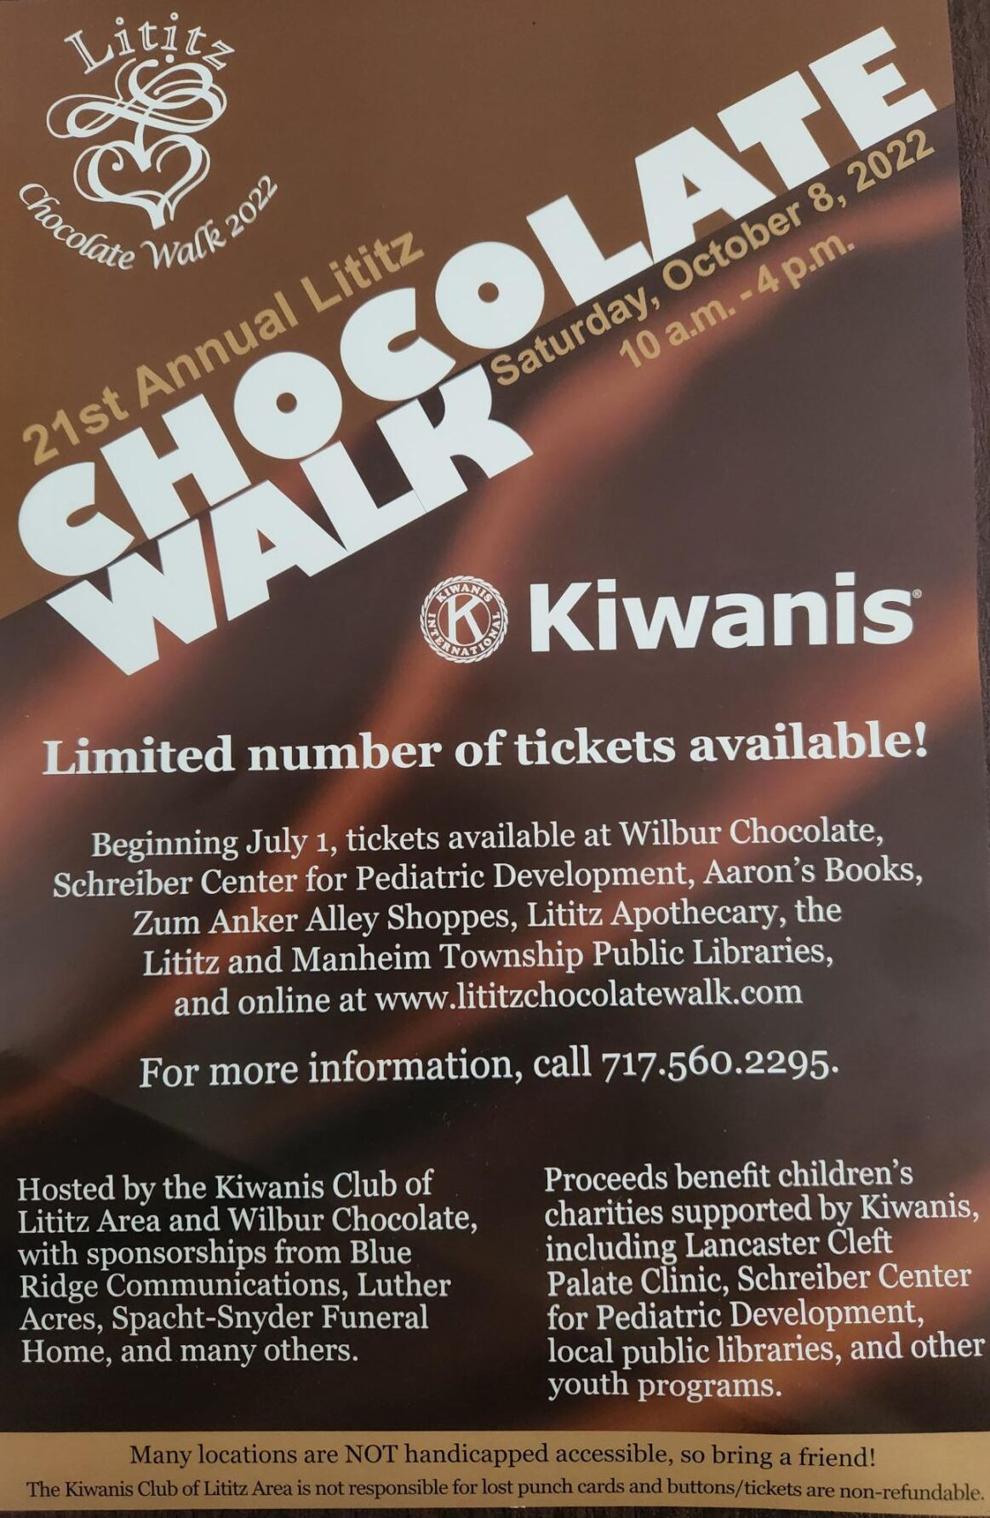 Tickets for the 21st annual Lititz Chocolate Walk go on sale Friday